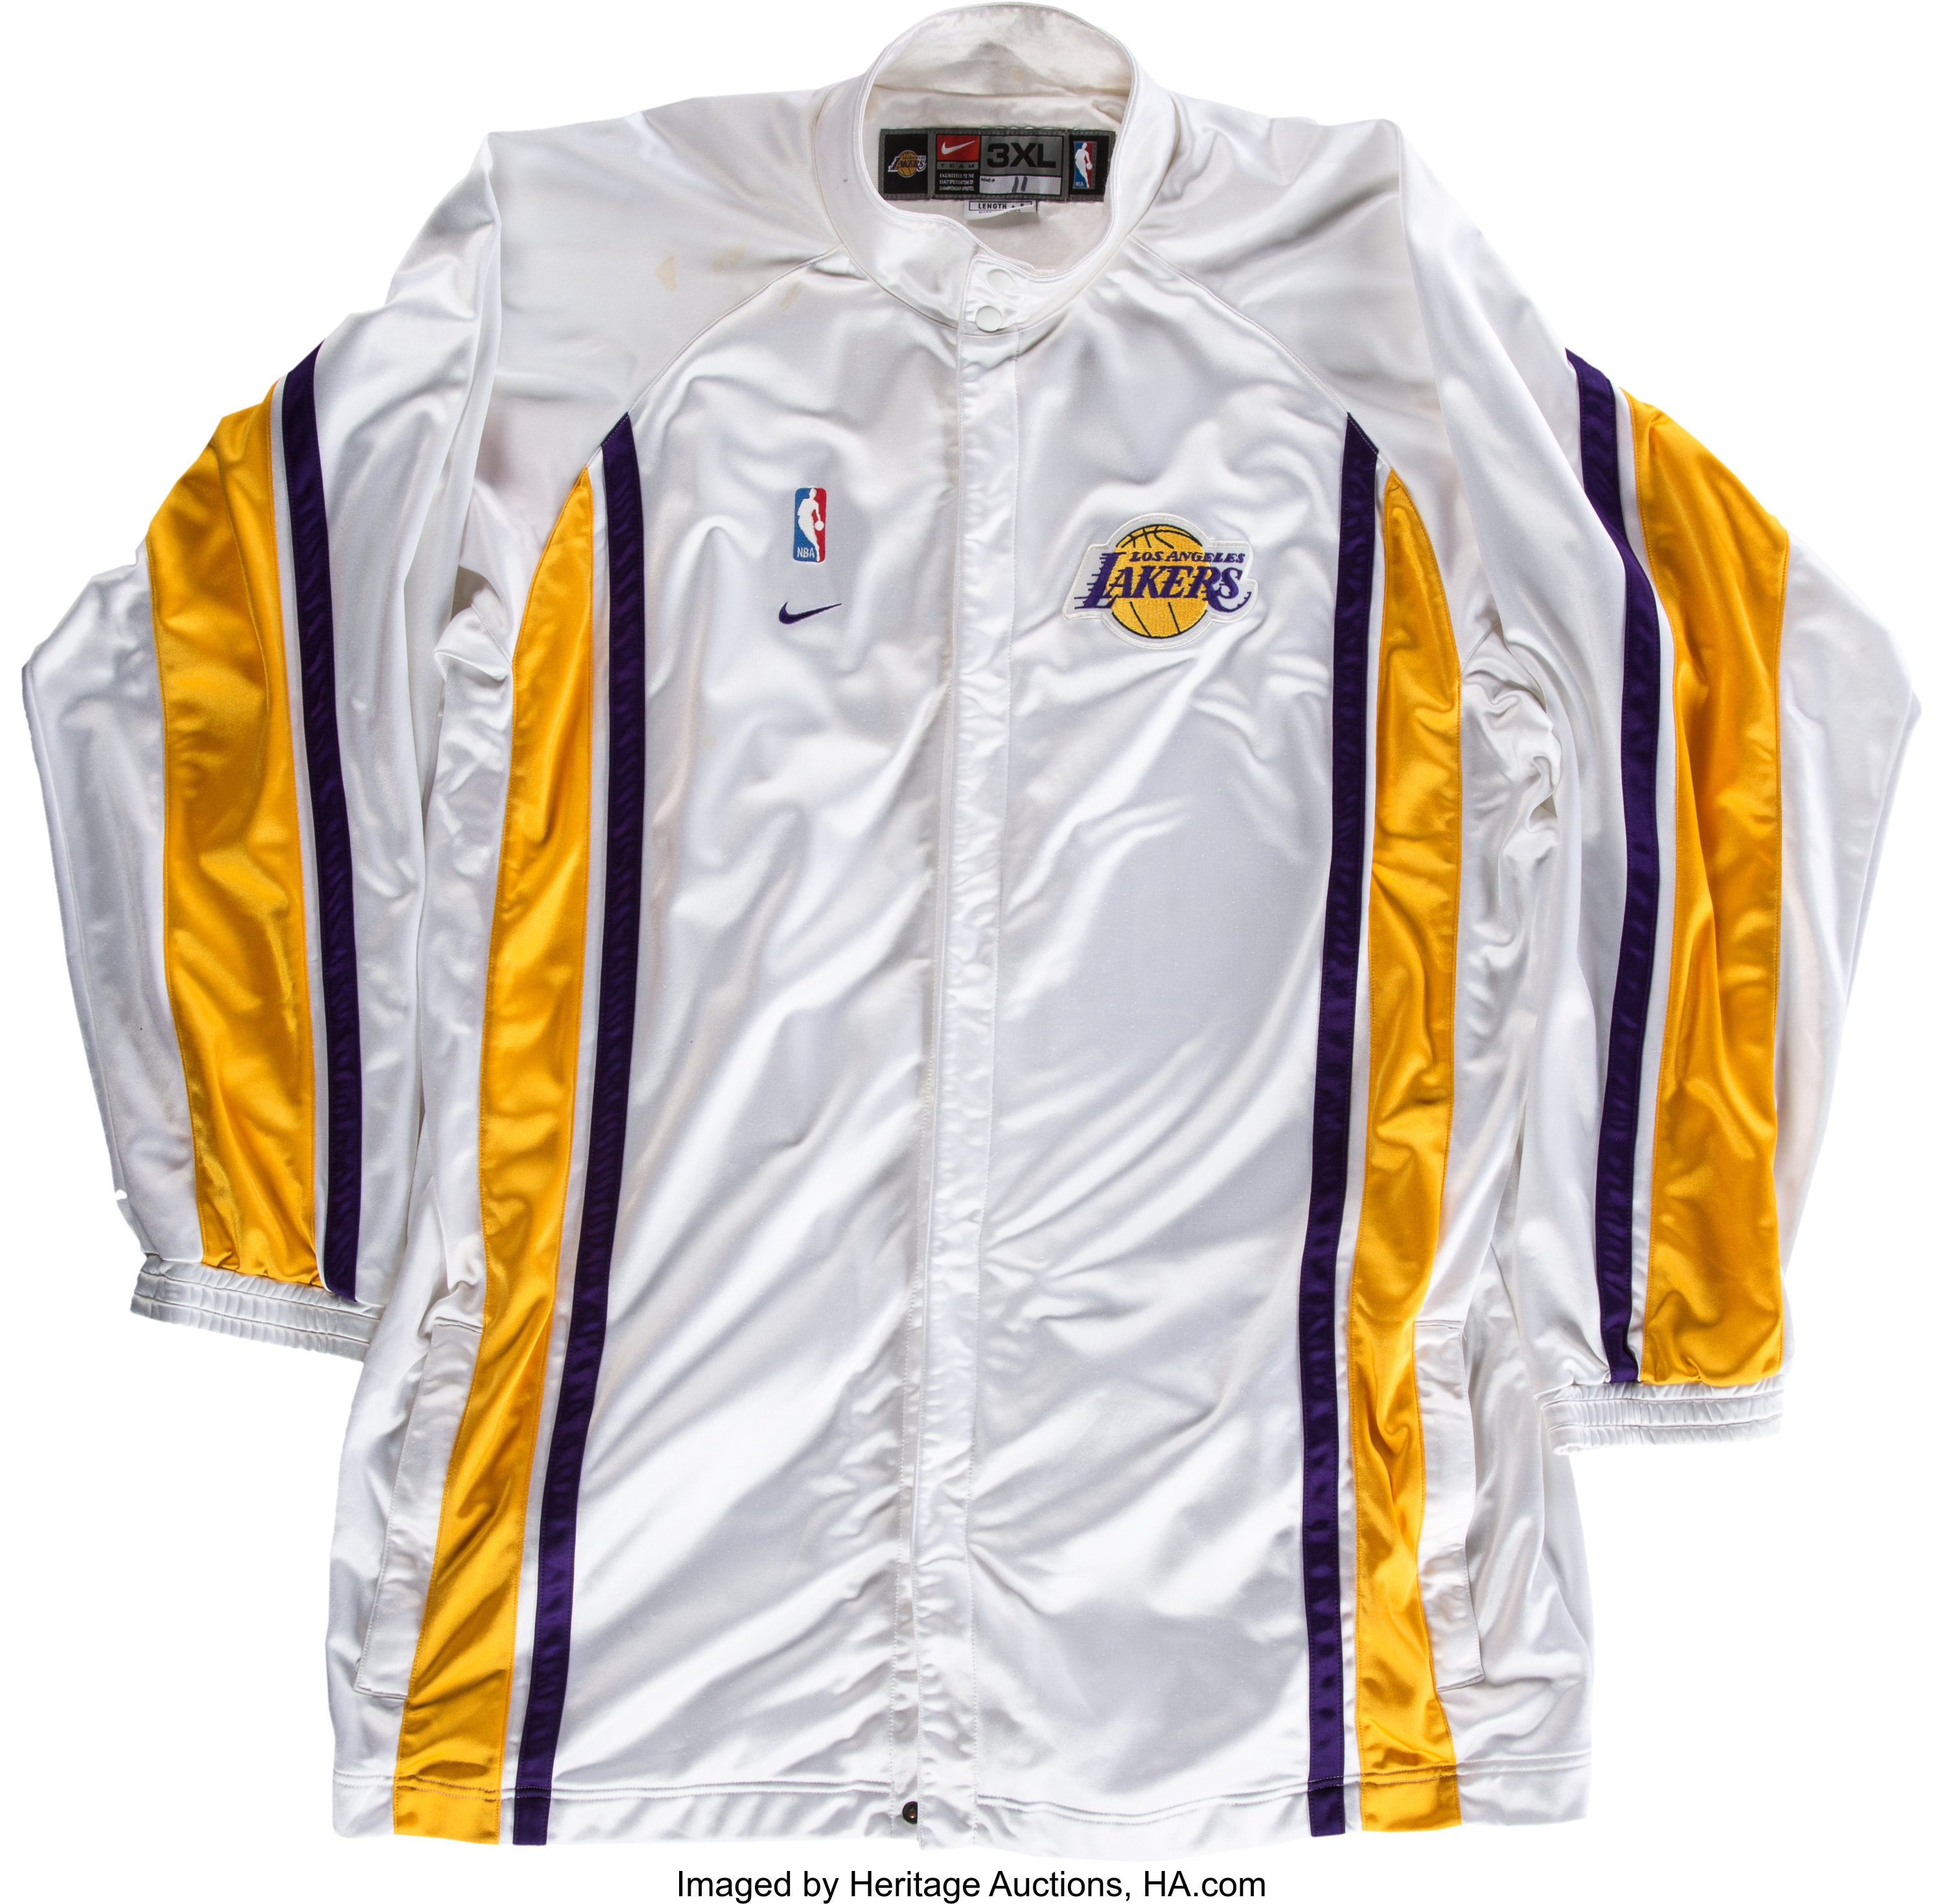 Early 1980's Los Angeles Lakers Game Worn Warmup Jacket.